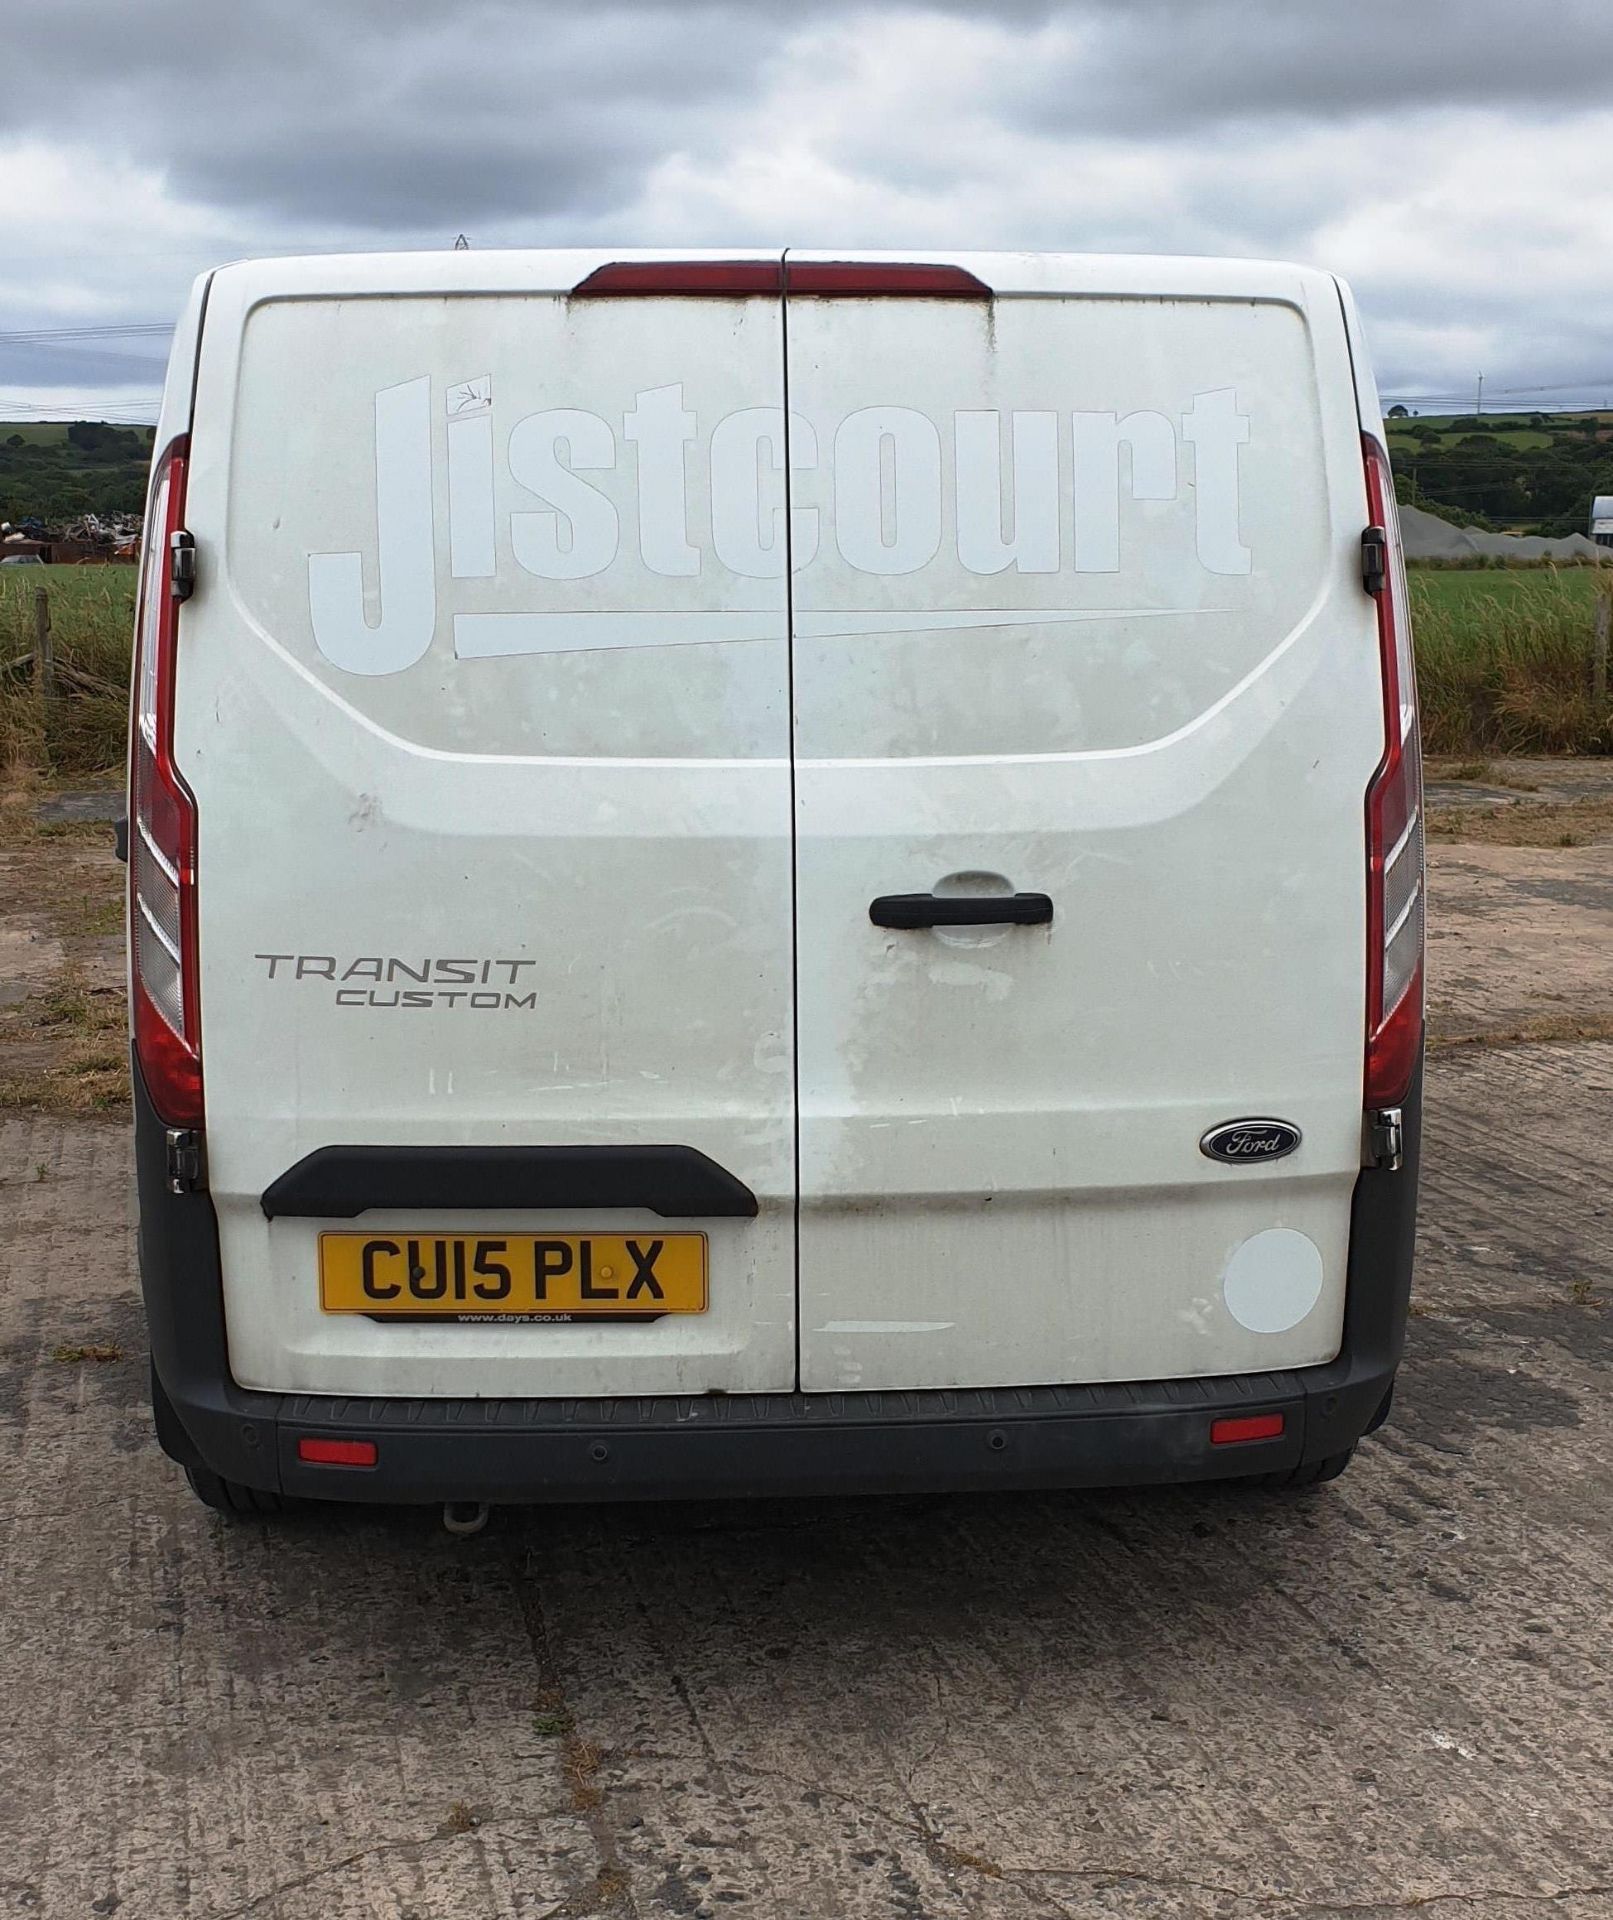 Ford Transit Custom 290 2.2 TDCi 100ps Low Roof Tr - Image 5 of 8